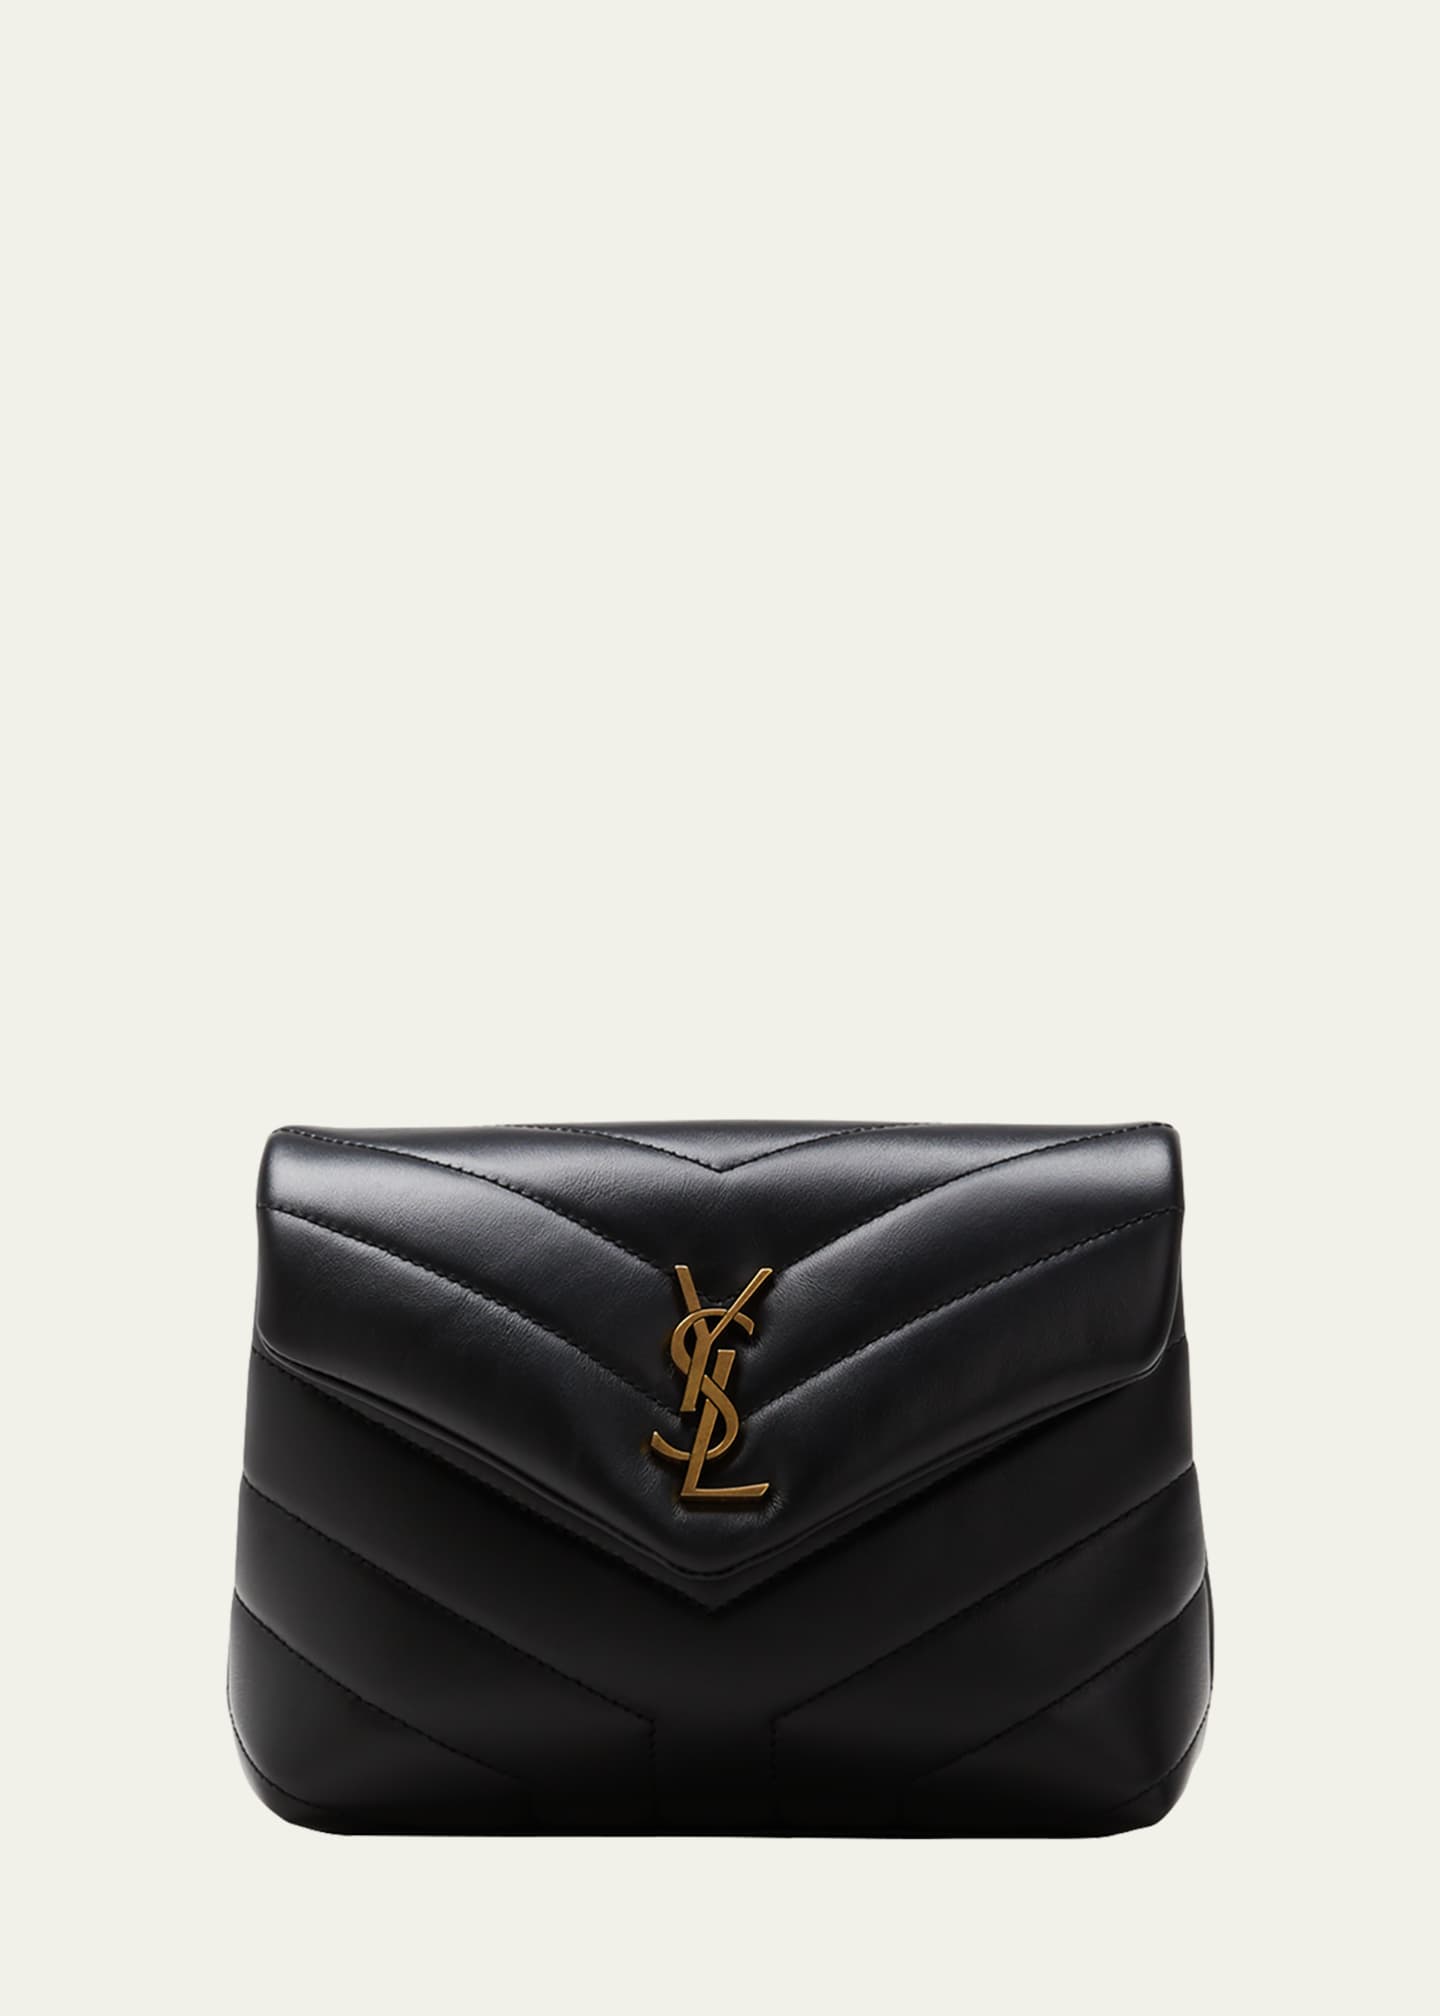 WHAT'S IN MY YSL SMALL LOULOU BAG? 